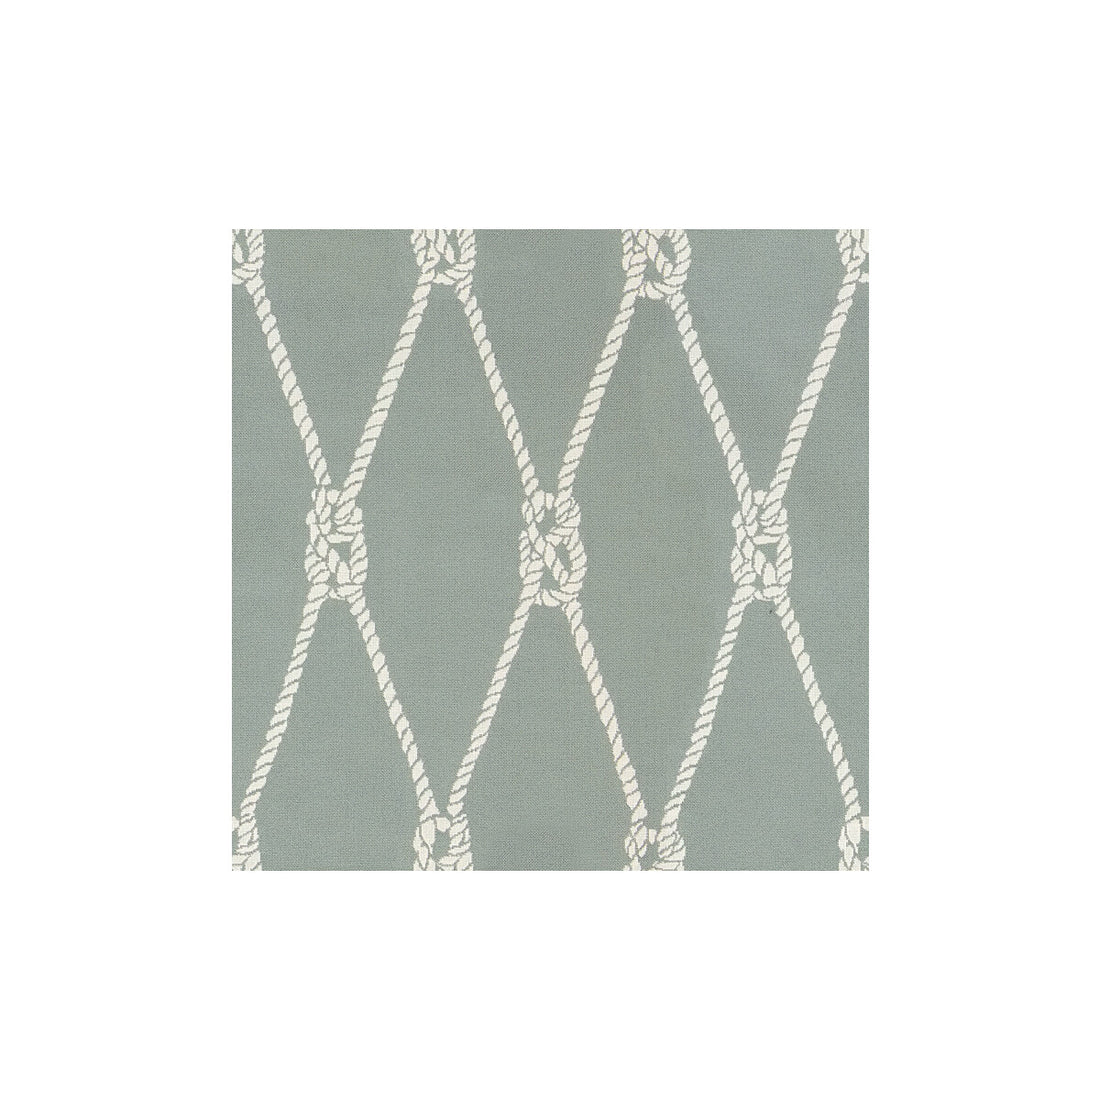 The Ropes fabric in breeze color - pattern 31778.11.0 - by Kravet Design in the Barclay Butera collection